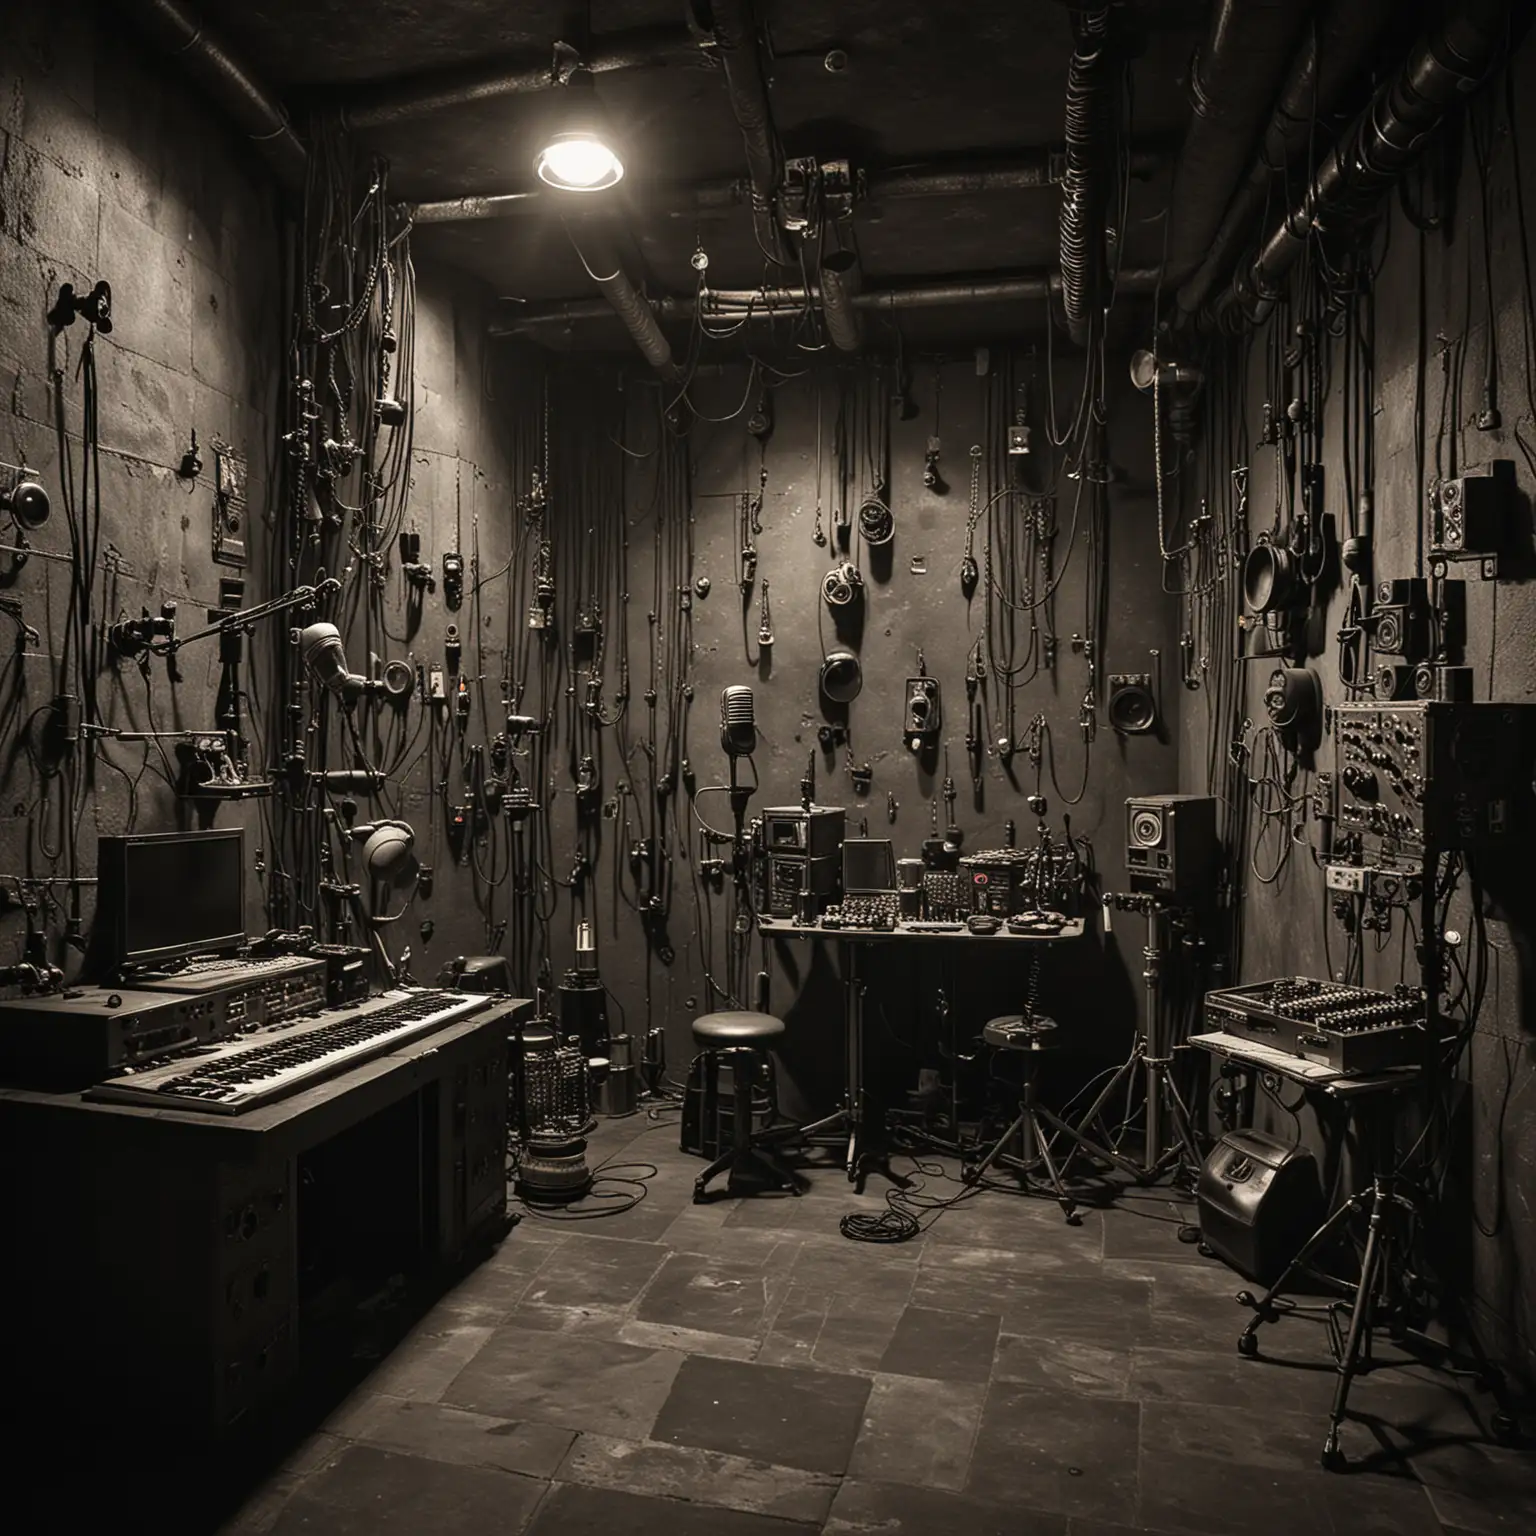 create a dungeon that is made up of recoding equipment that you would find in a studio. The image should have a dark overtone and silver old school studio microphone should be hanging from the ceiling in the foreground 
